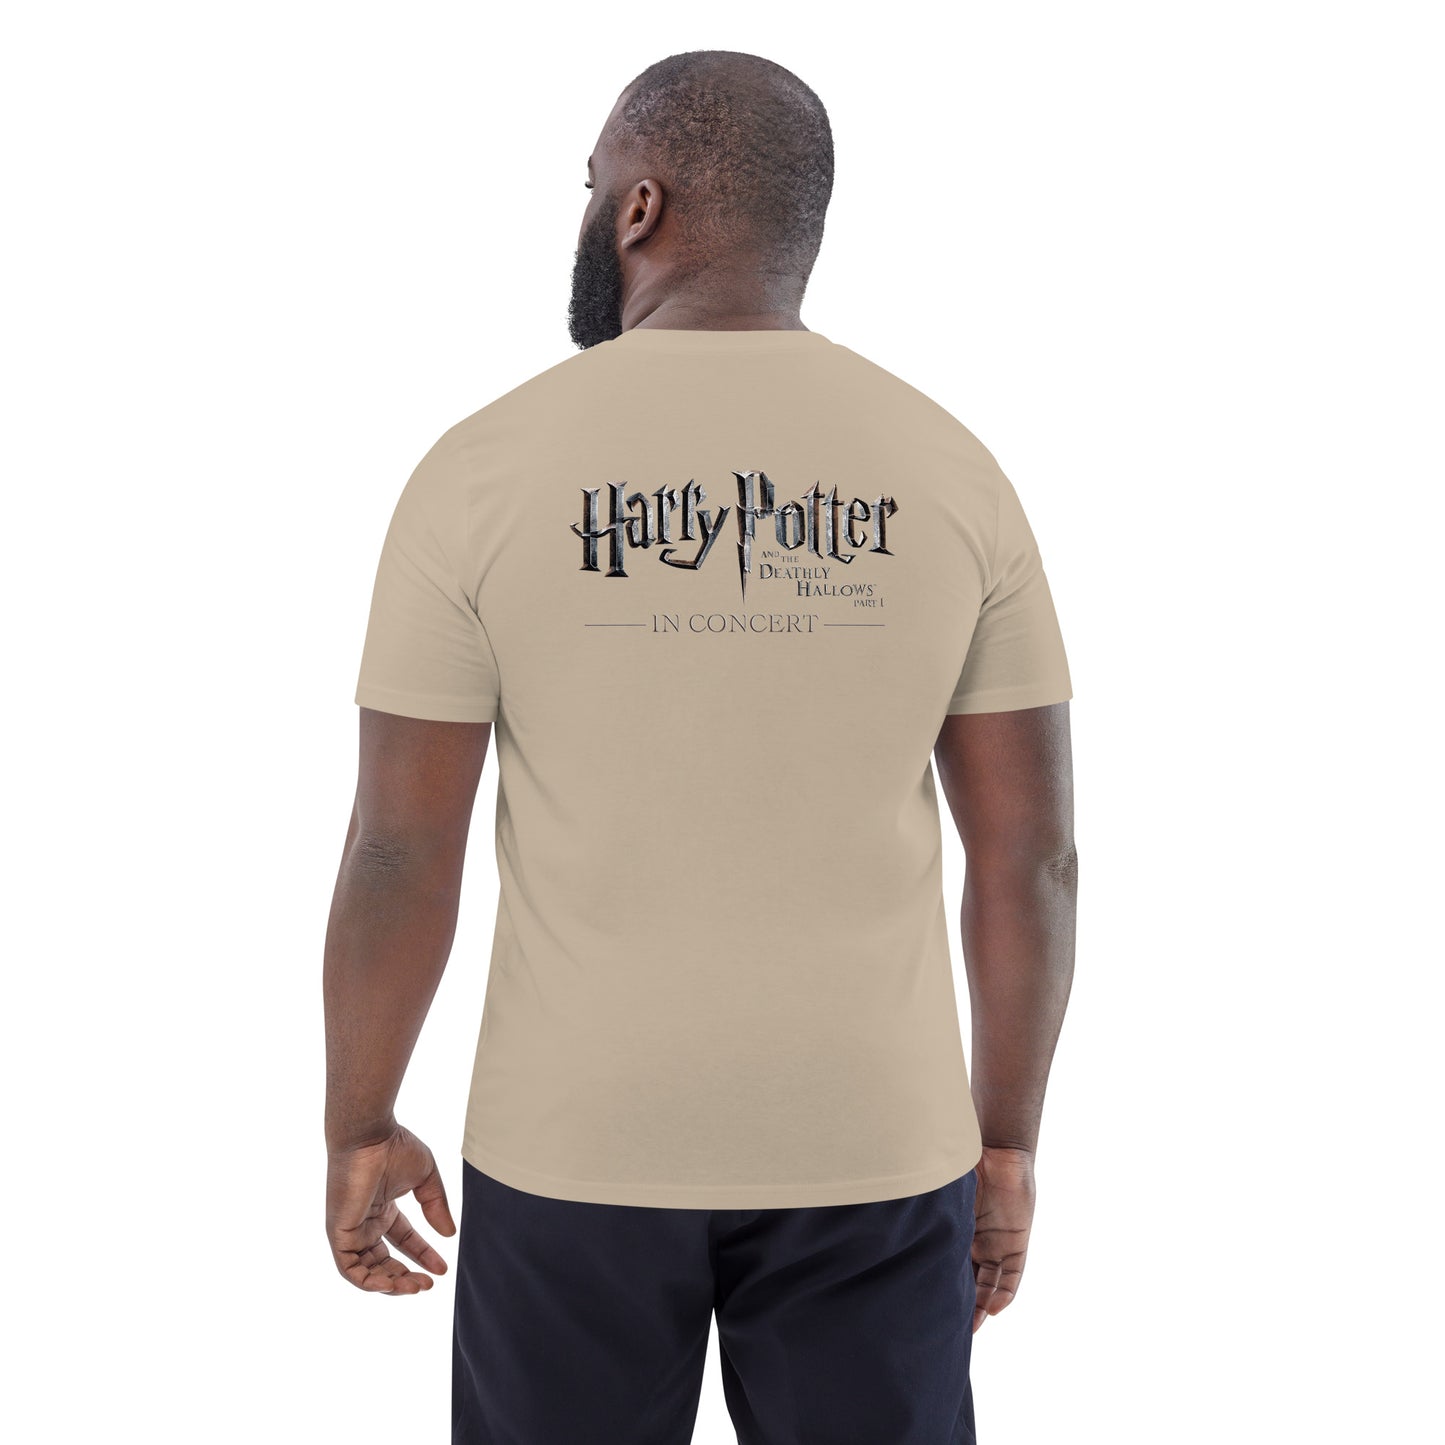 Unisex organic cotton t-shirt ("Undesirable" from Harry Potter and the Deathly Hallows™ - Part 1 in Concert)